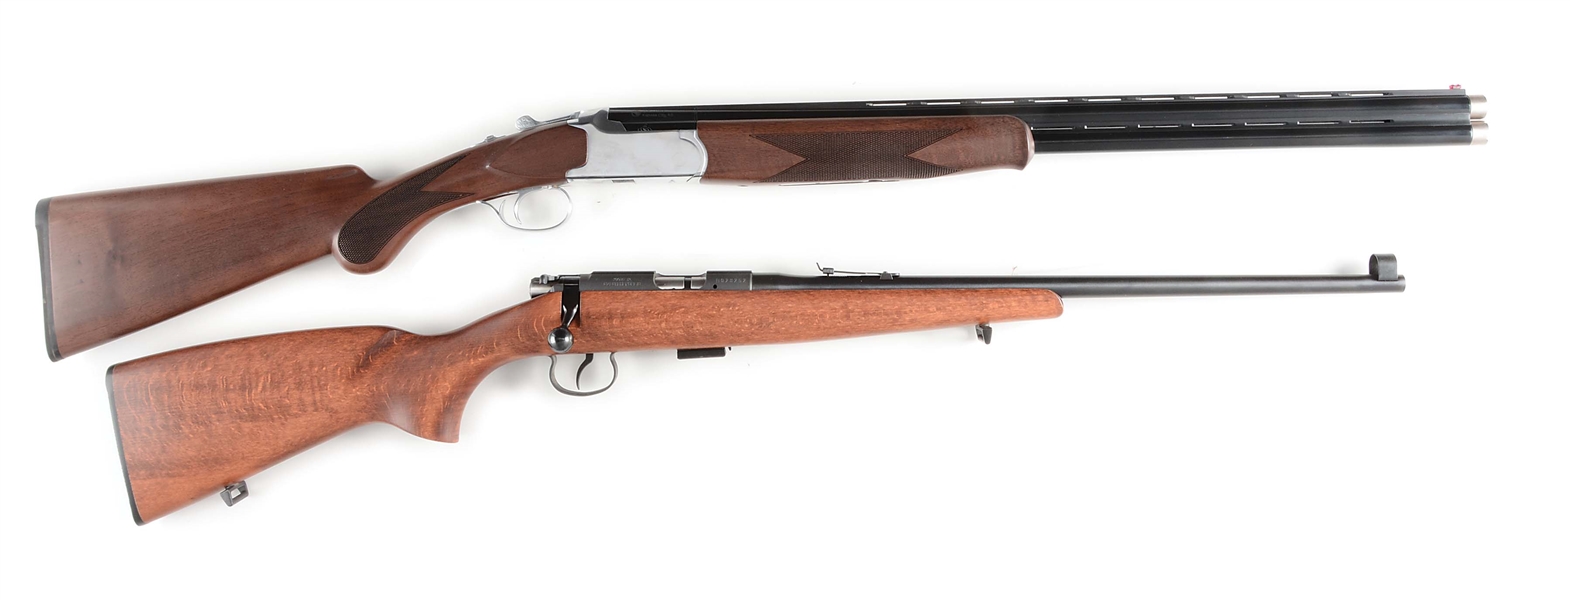 (M) LOT OF 2: CZ BOLT ACTION RIFLE AND OVER UNDER SHOTGUN.